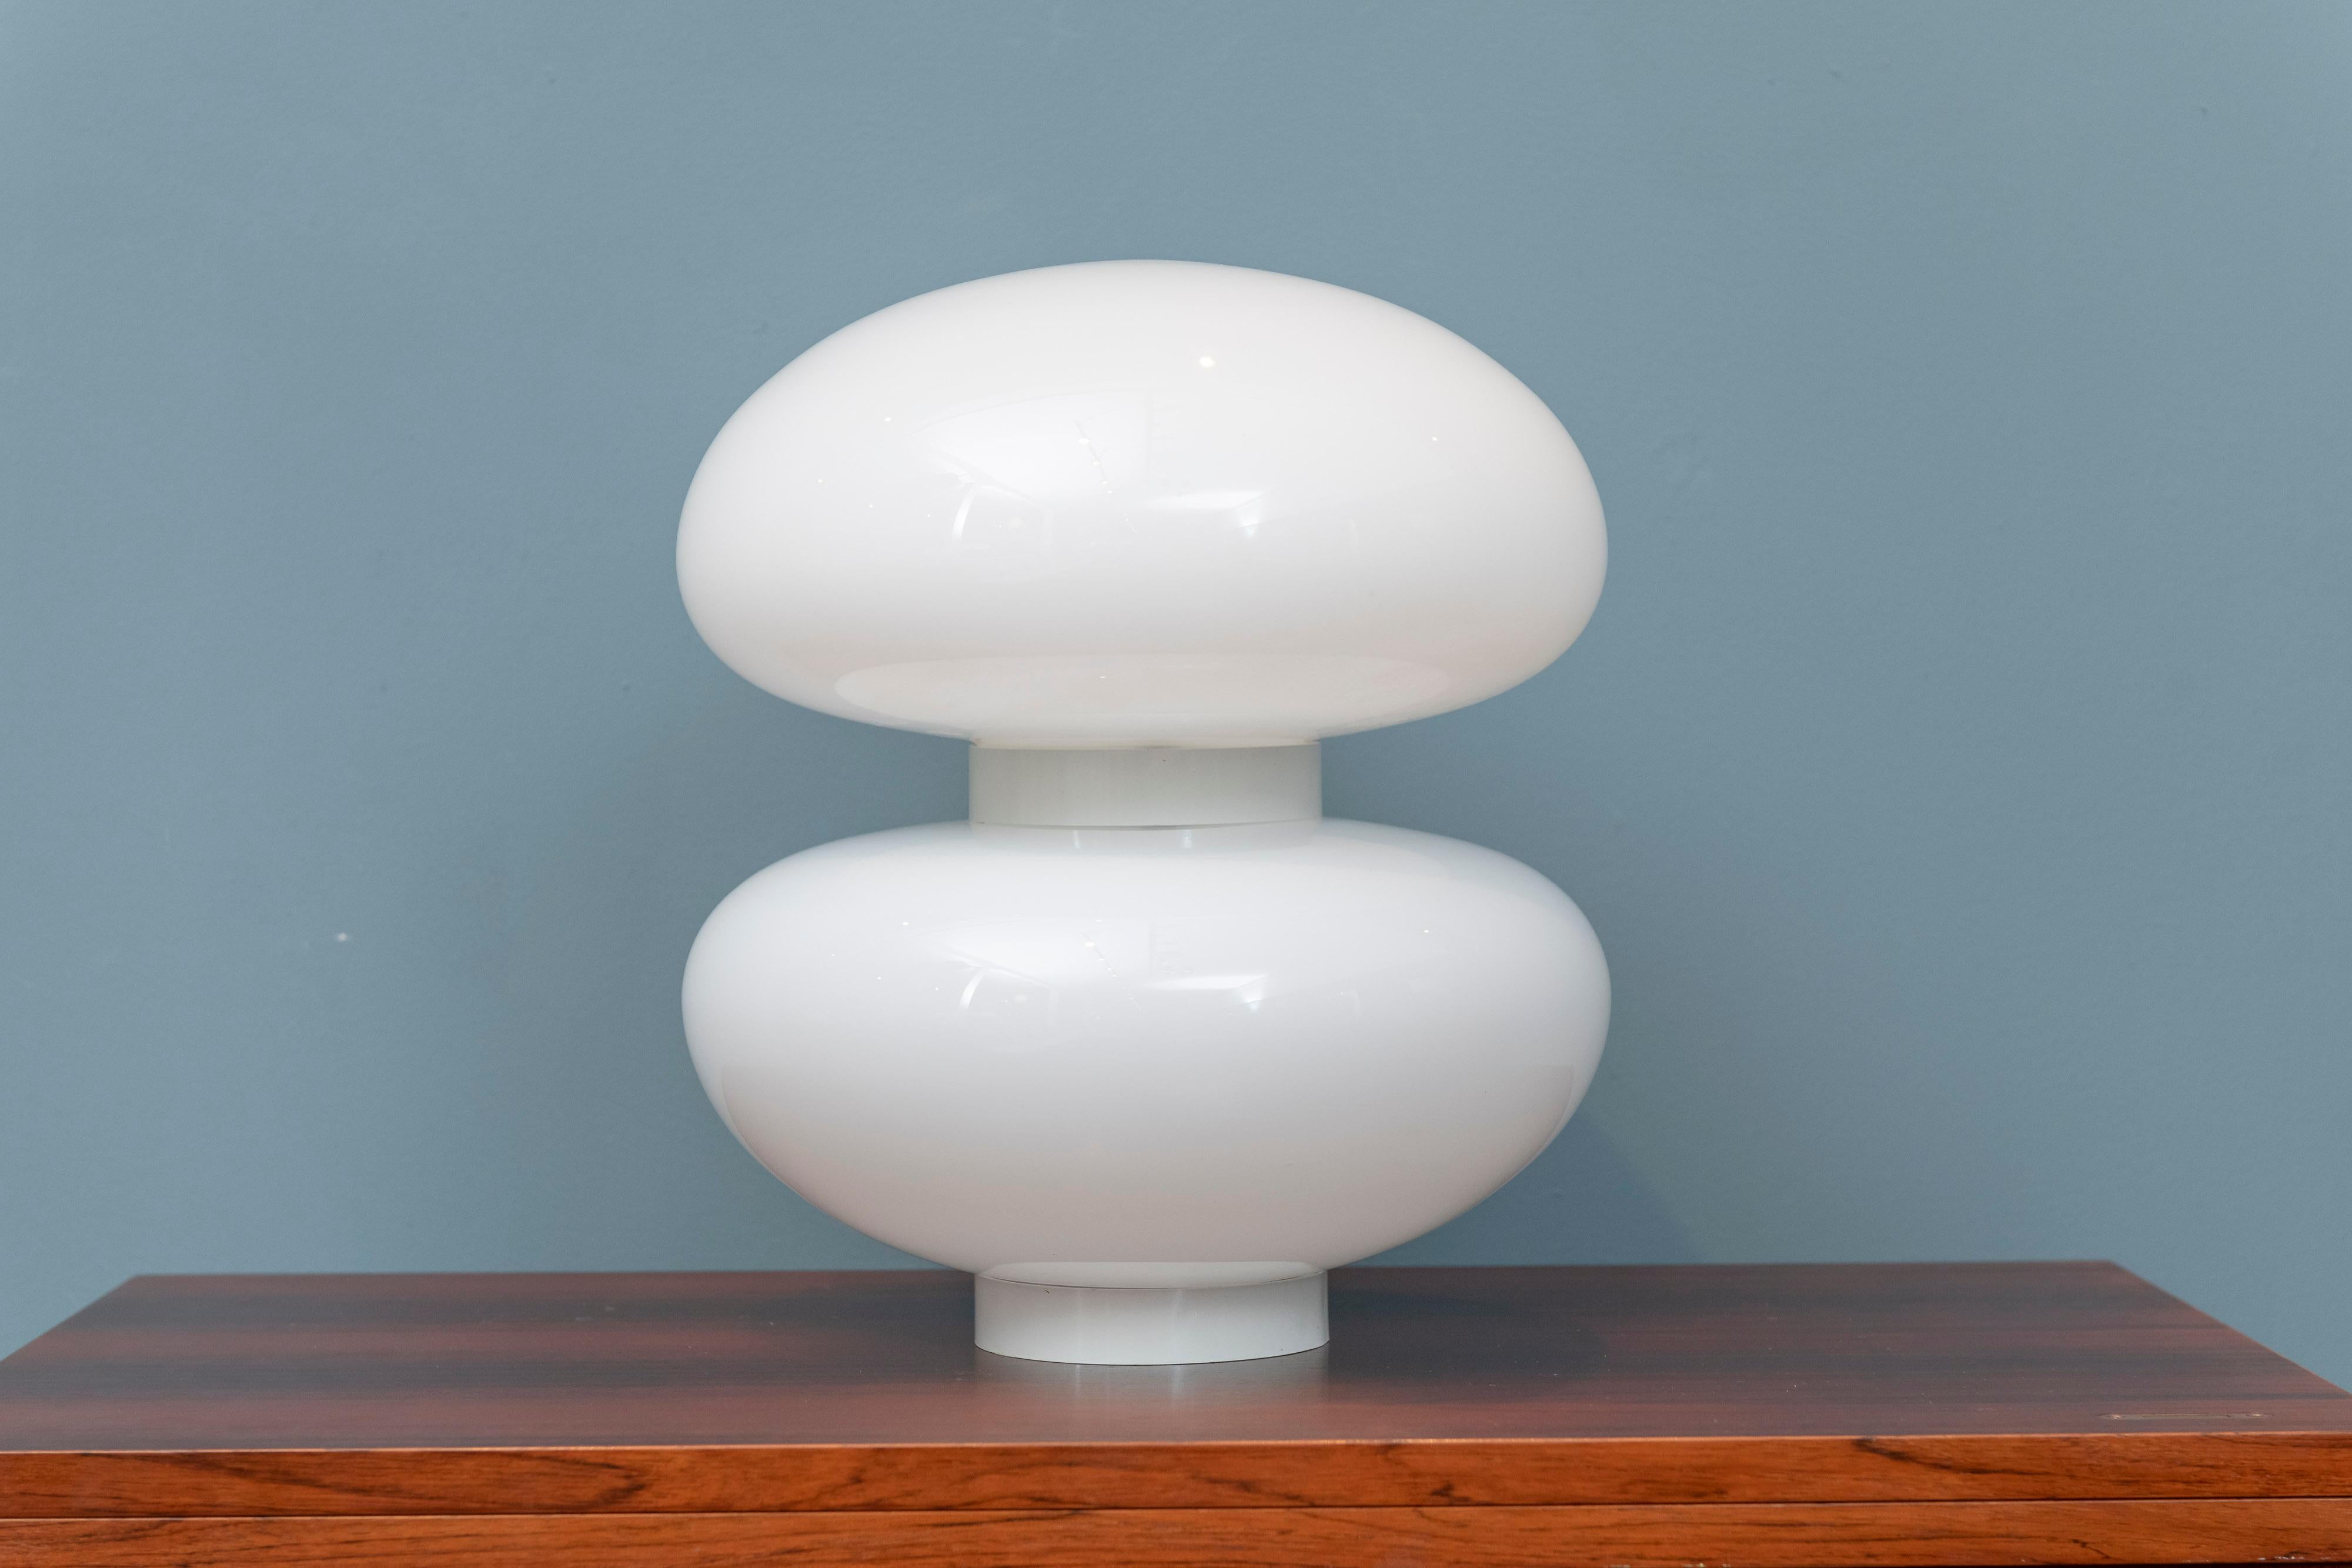 Bill Curry Design Line table lamp comprising two glass globes supported by two circular rings, one as base and the other holding the double porcelain socket with two settings, labeled.

William 'Bill' Curry (1927-1971) Founded Design Line, Inc. in